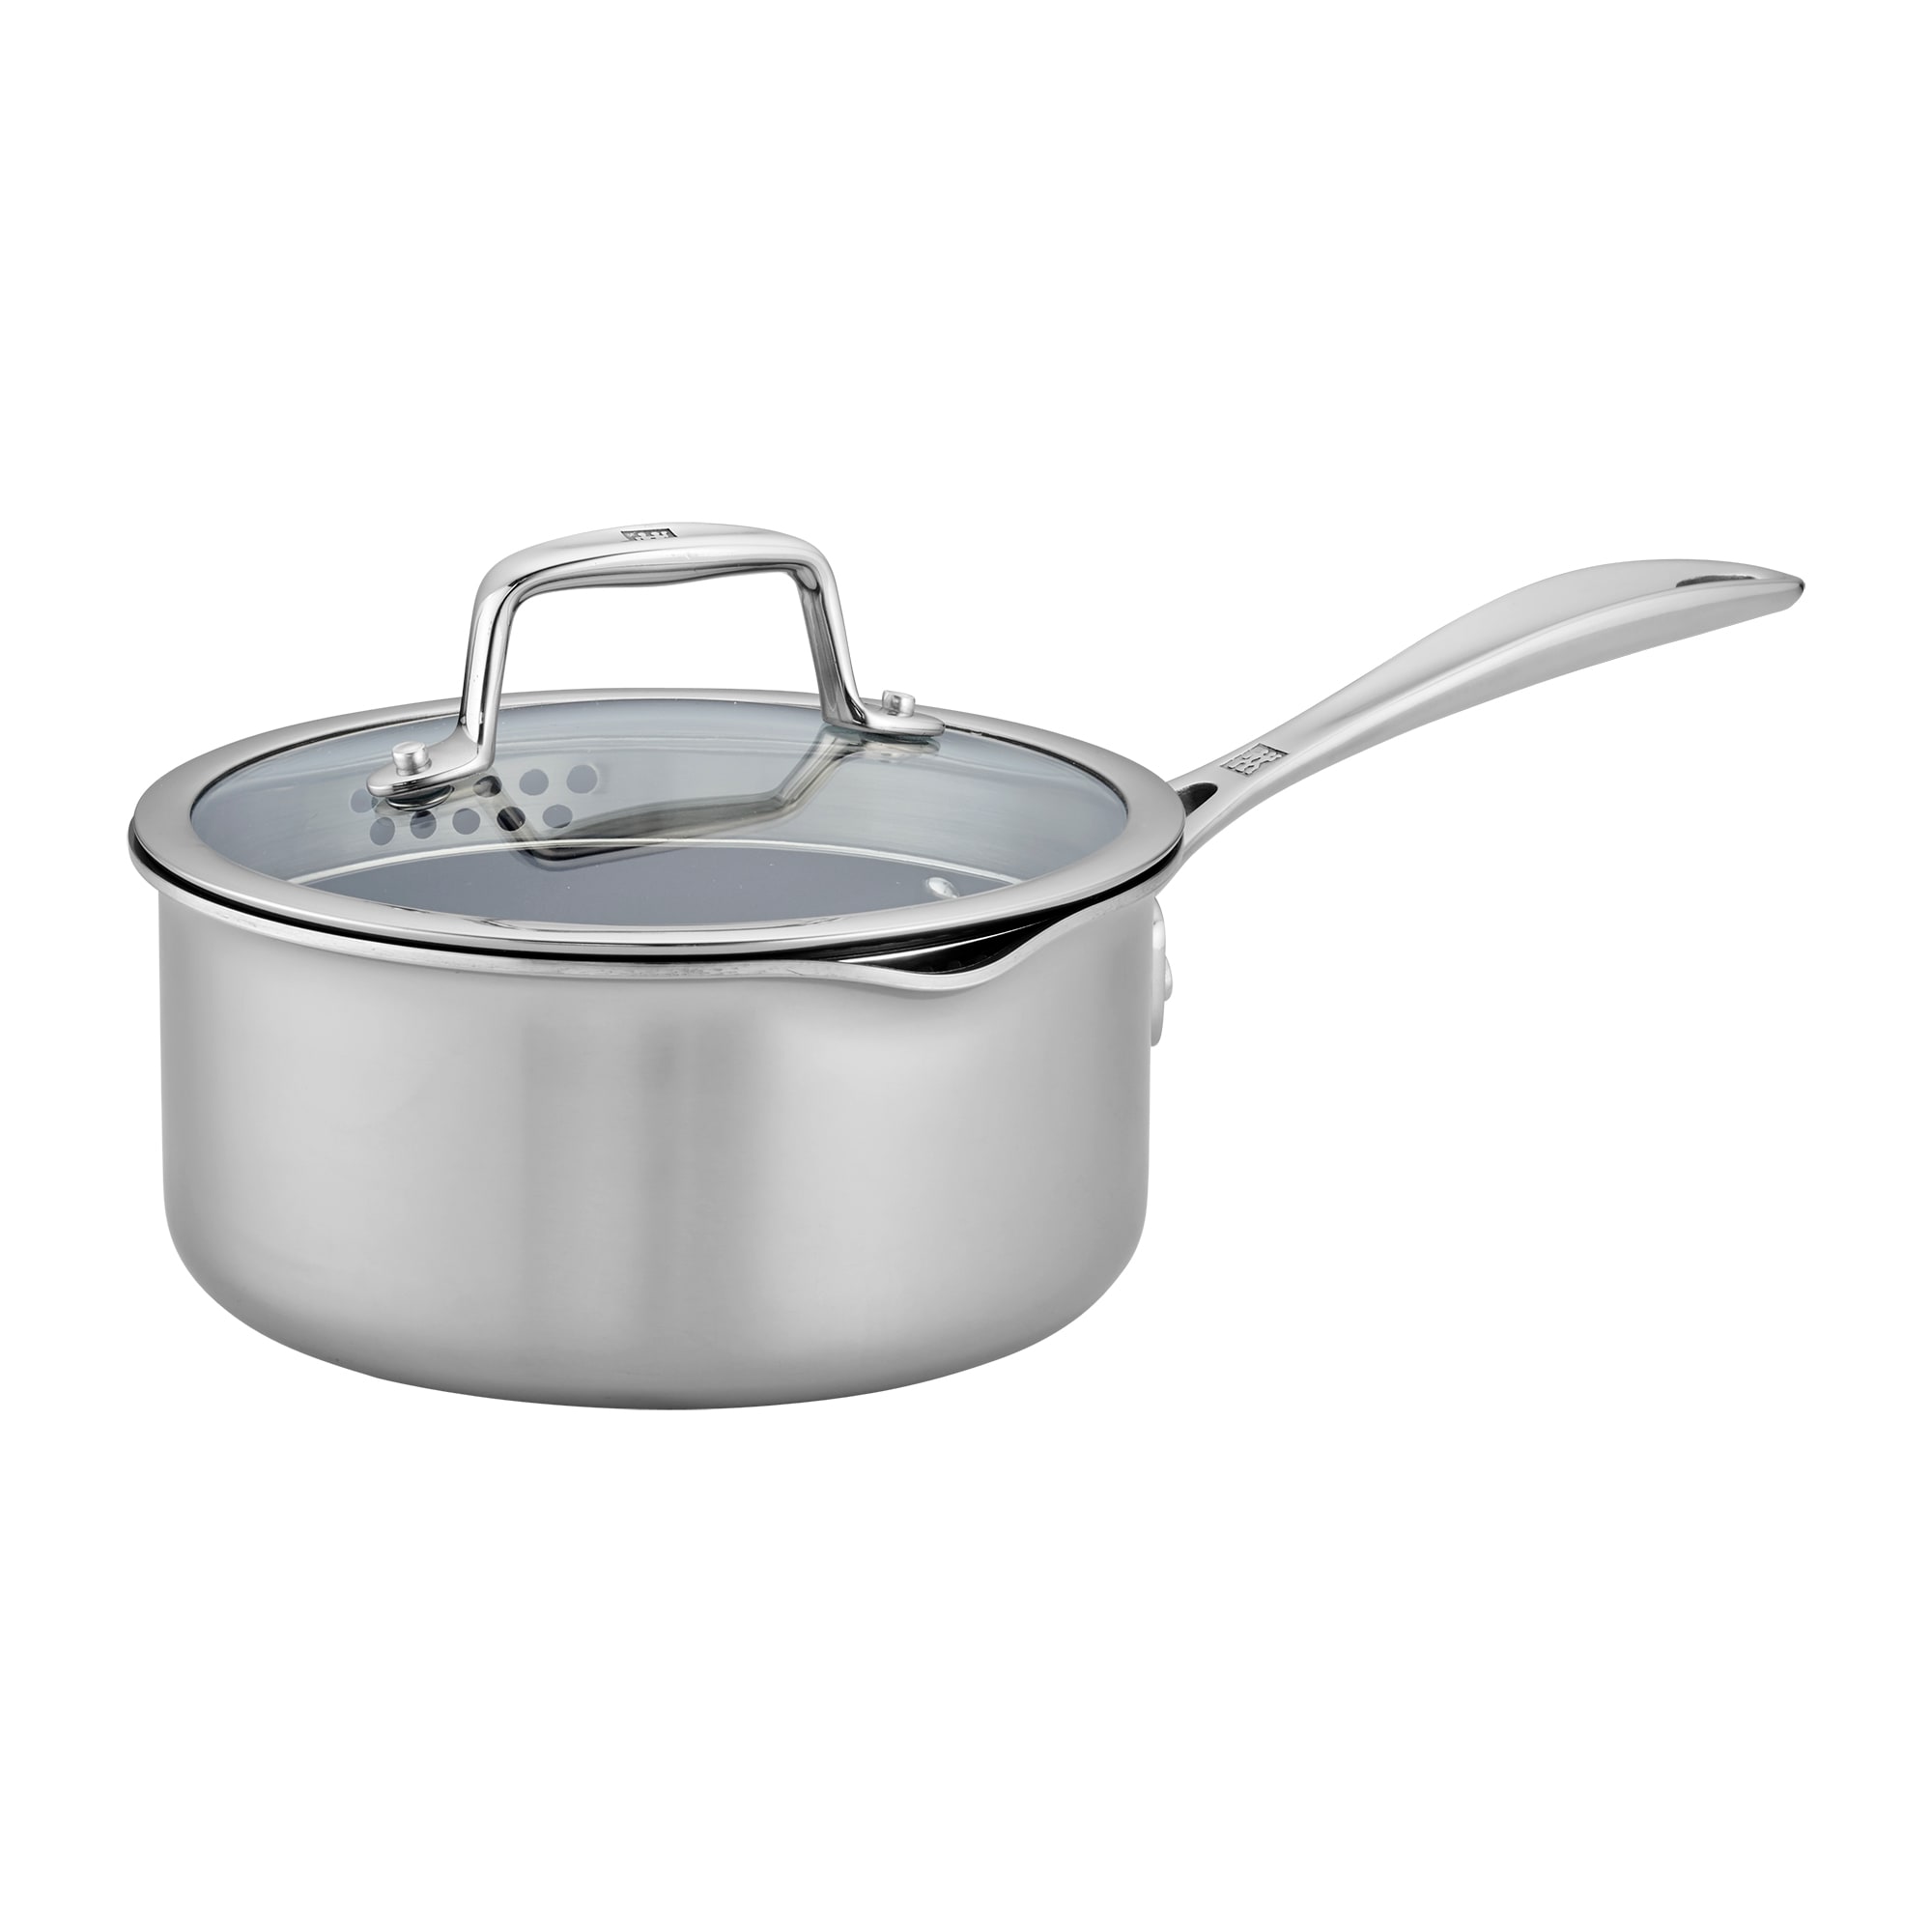 HENCKELS 8.5-Qt. Stainless Steel Pasta Pot with Straining Baskets